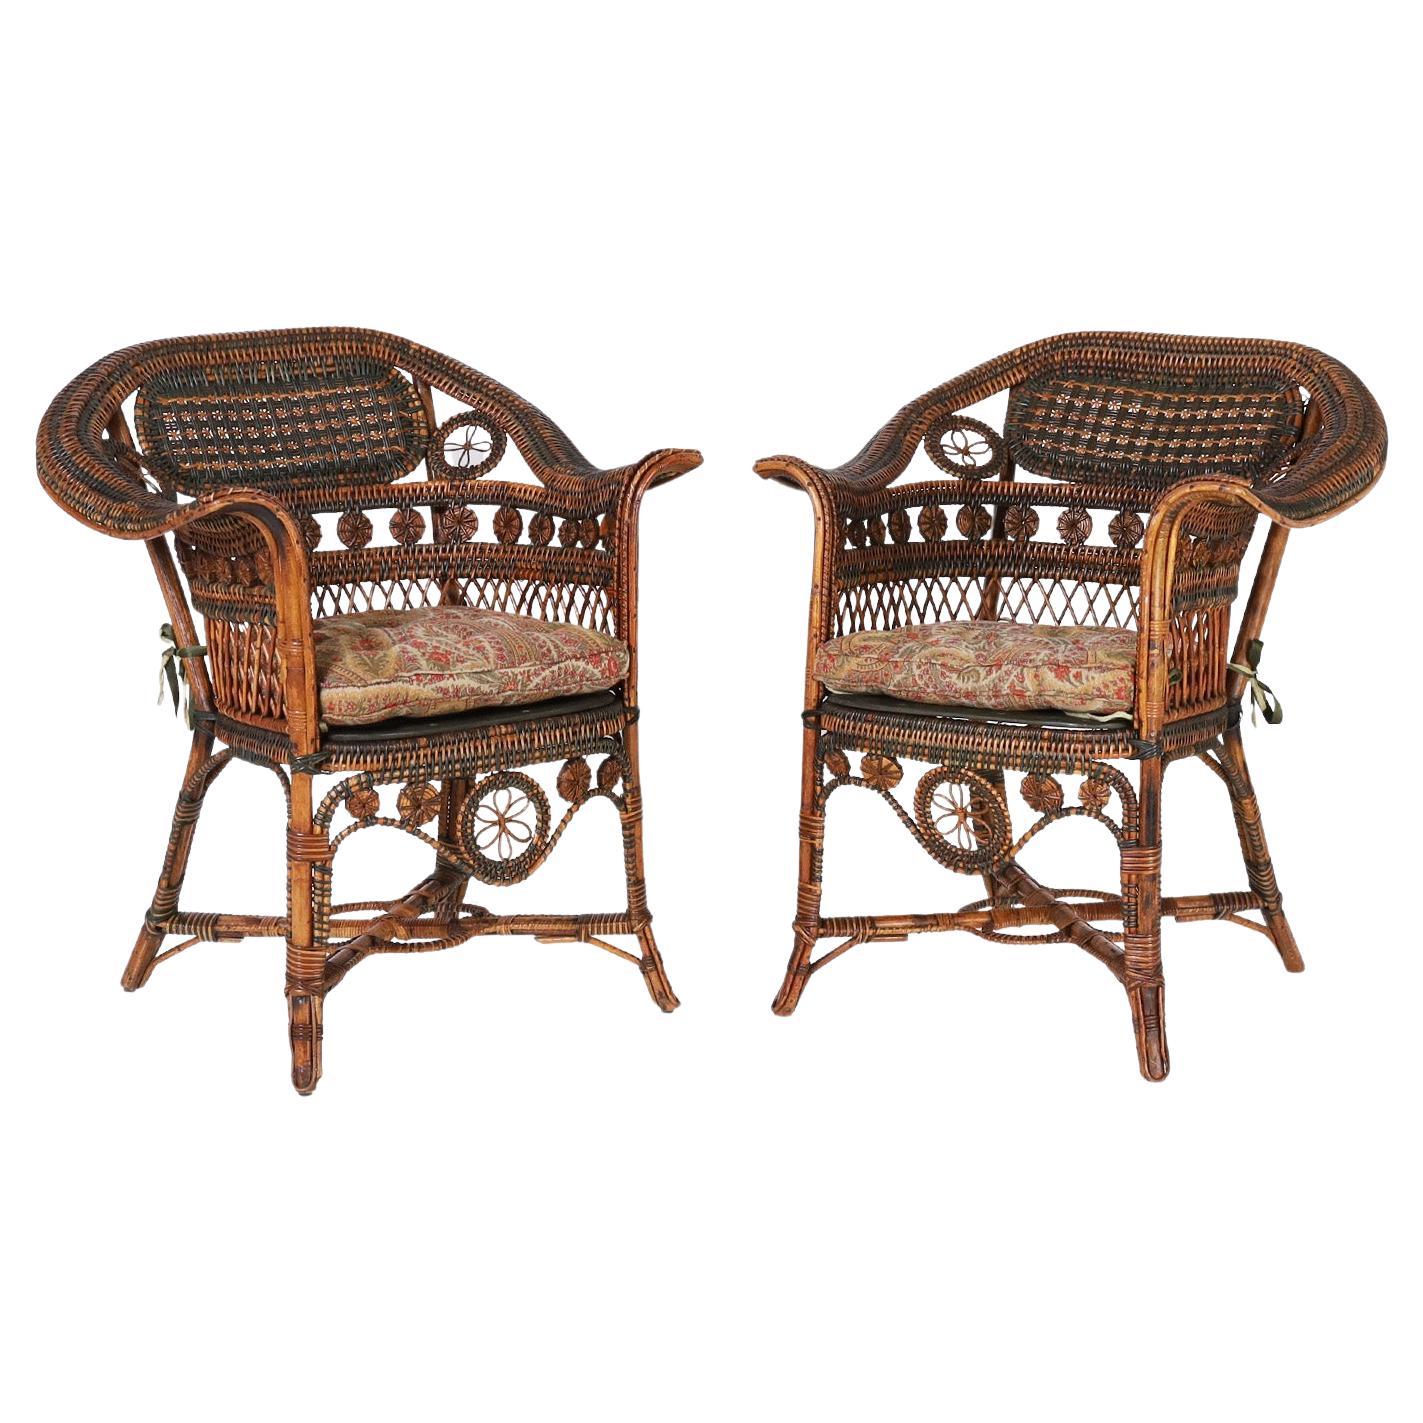 Pair of French Rattan Cafe Chairs